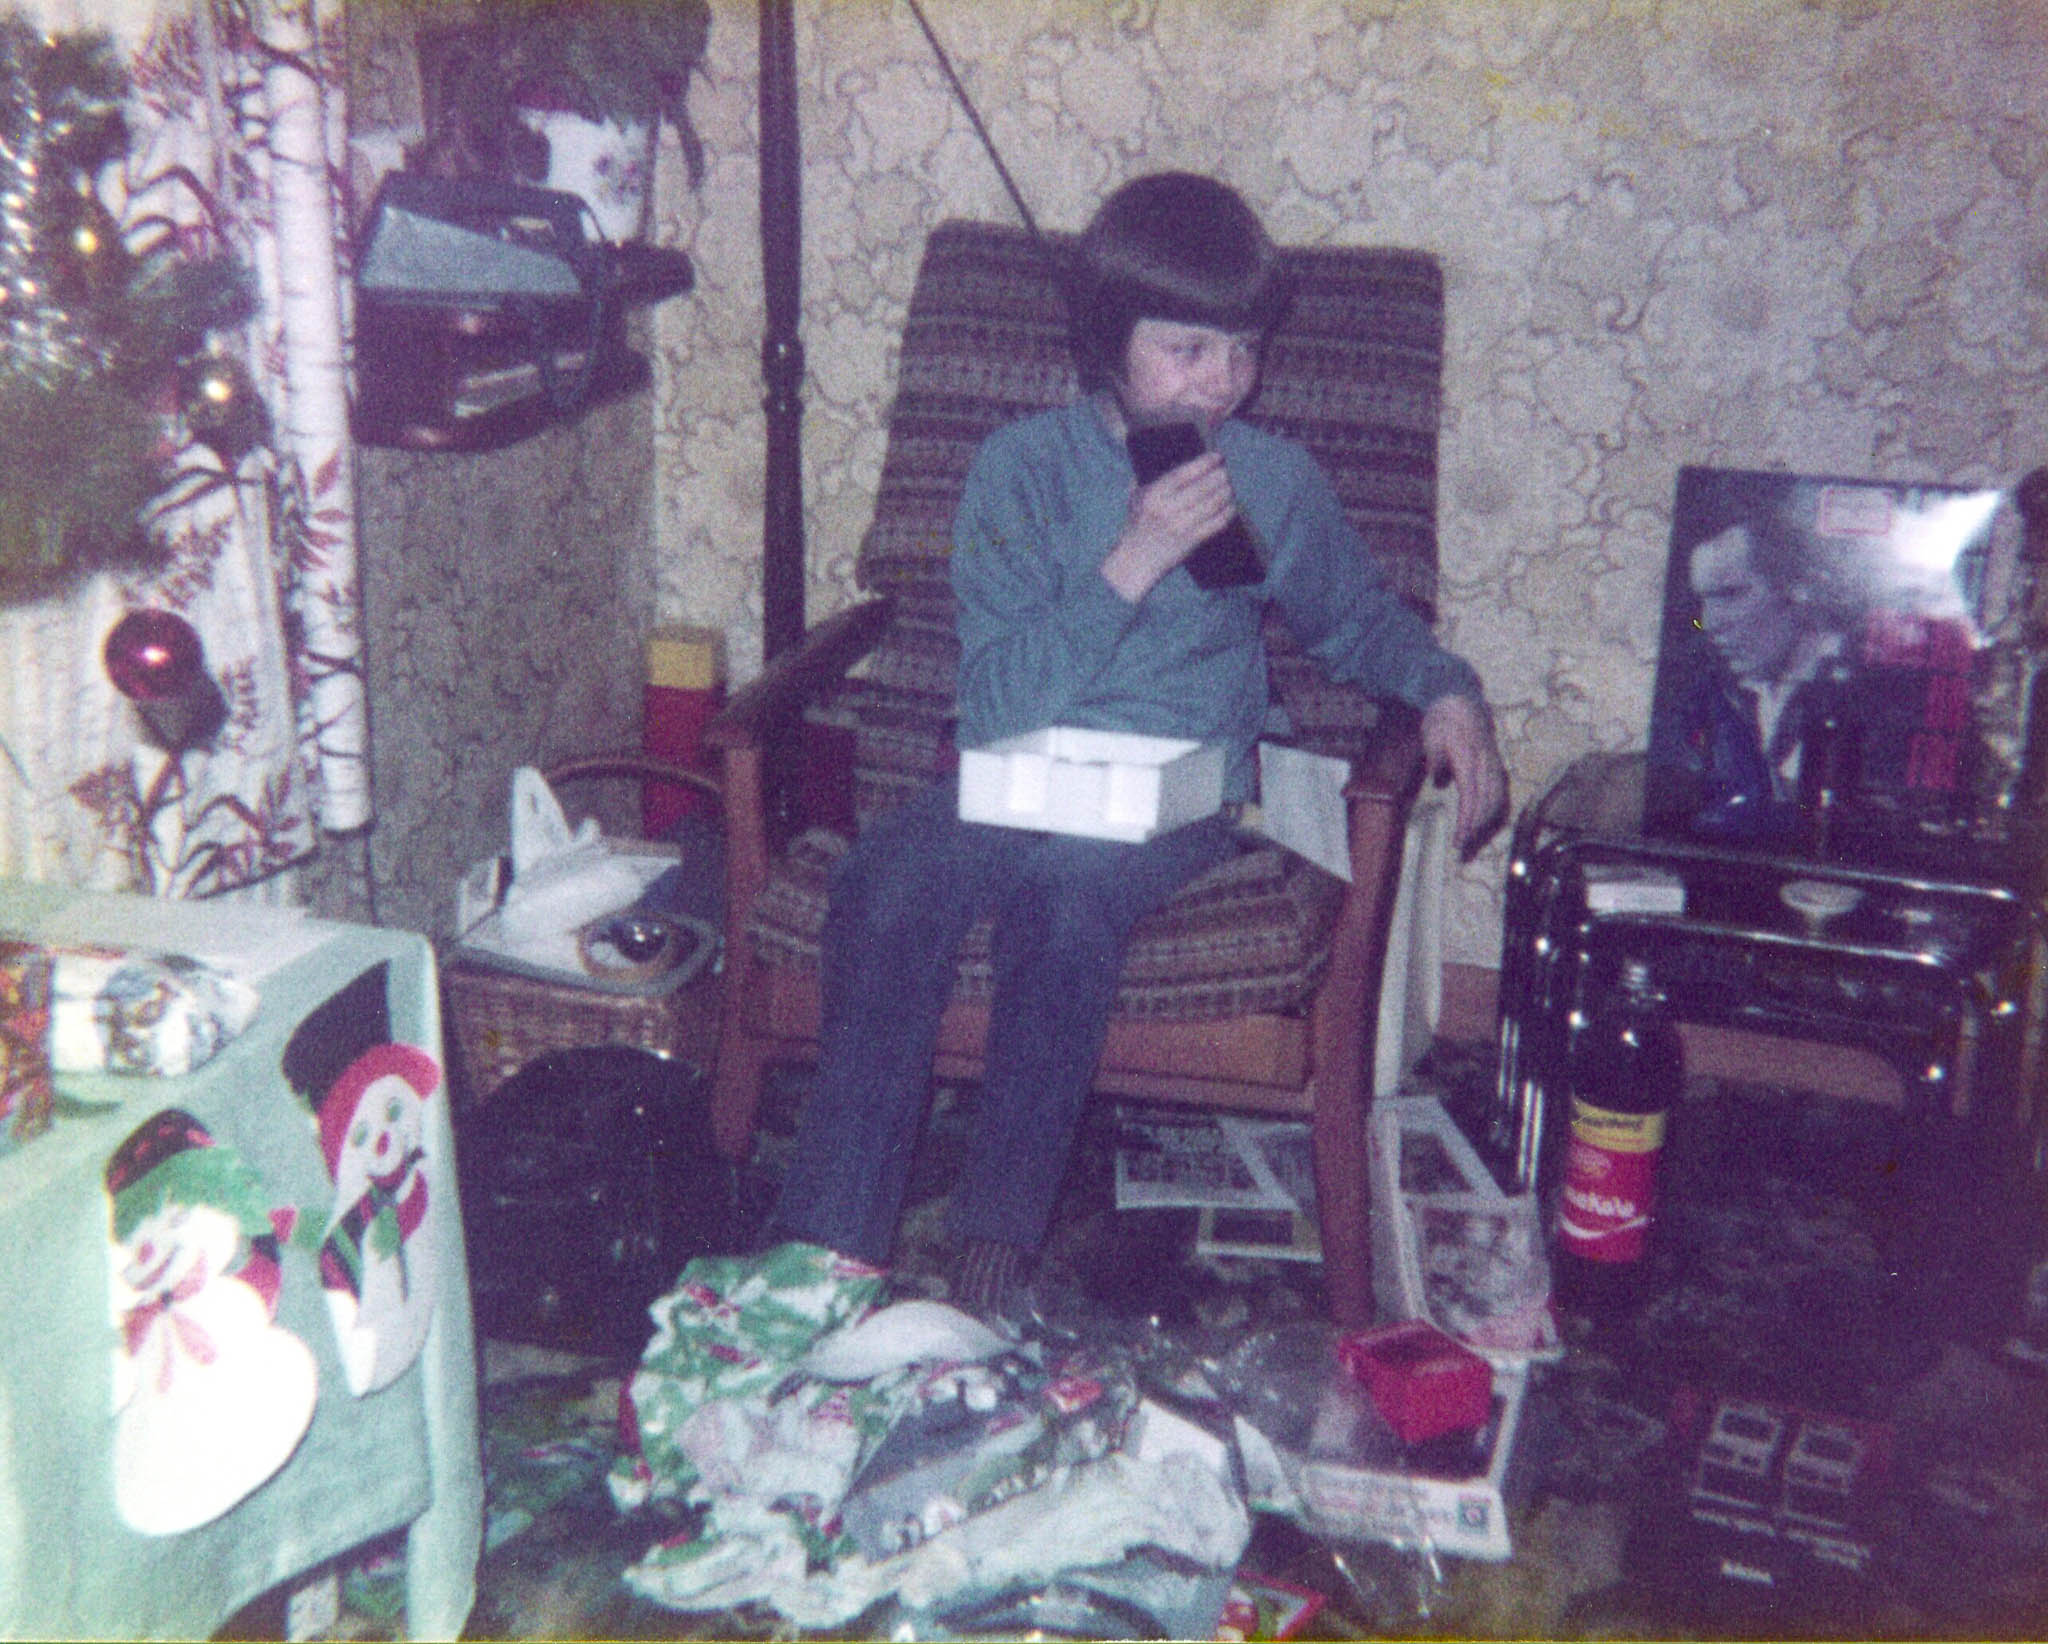 Young boy aged around 10 on a chair in the living room on Christmas morning. He's talking into a walkie talkie that was clearly a Christmas present. There are presents at his feet and an Adam Ant record beside him, Friend or Foe. 